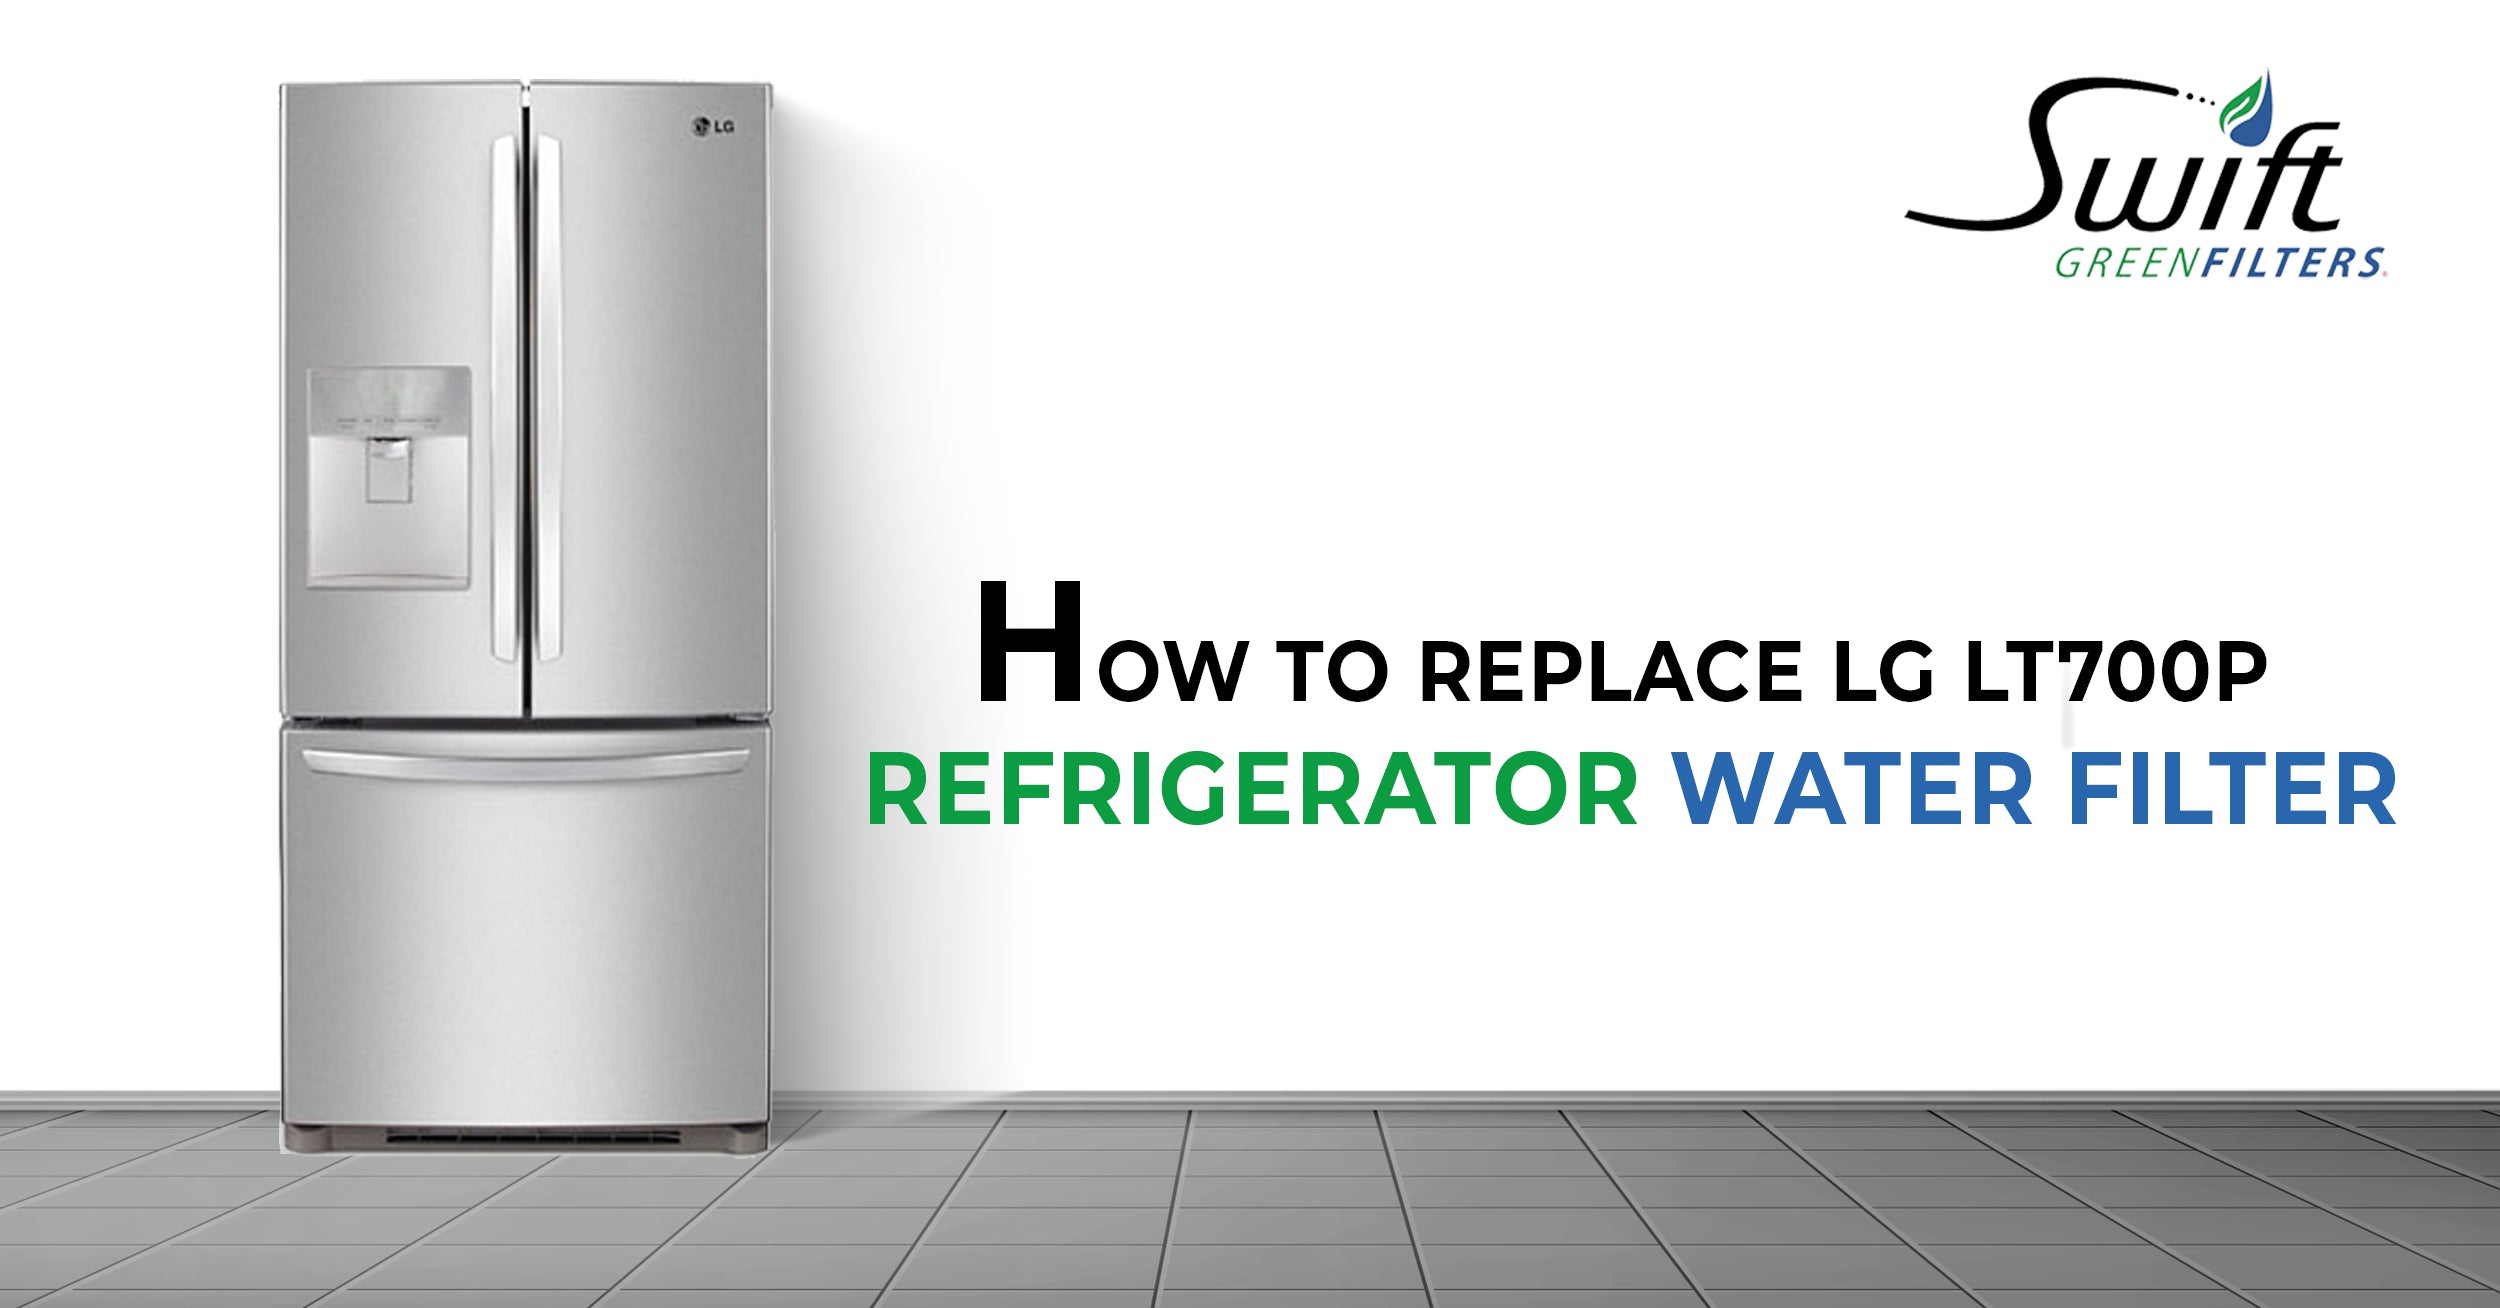 How to Replace LG LT700P Refrigerator Water Filter